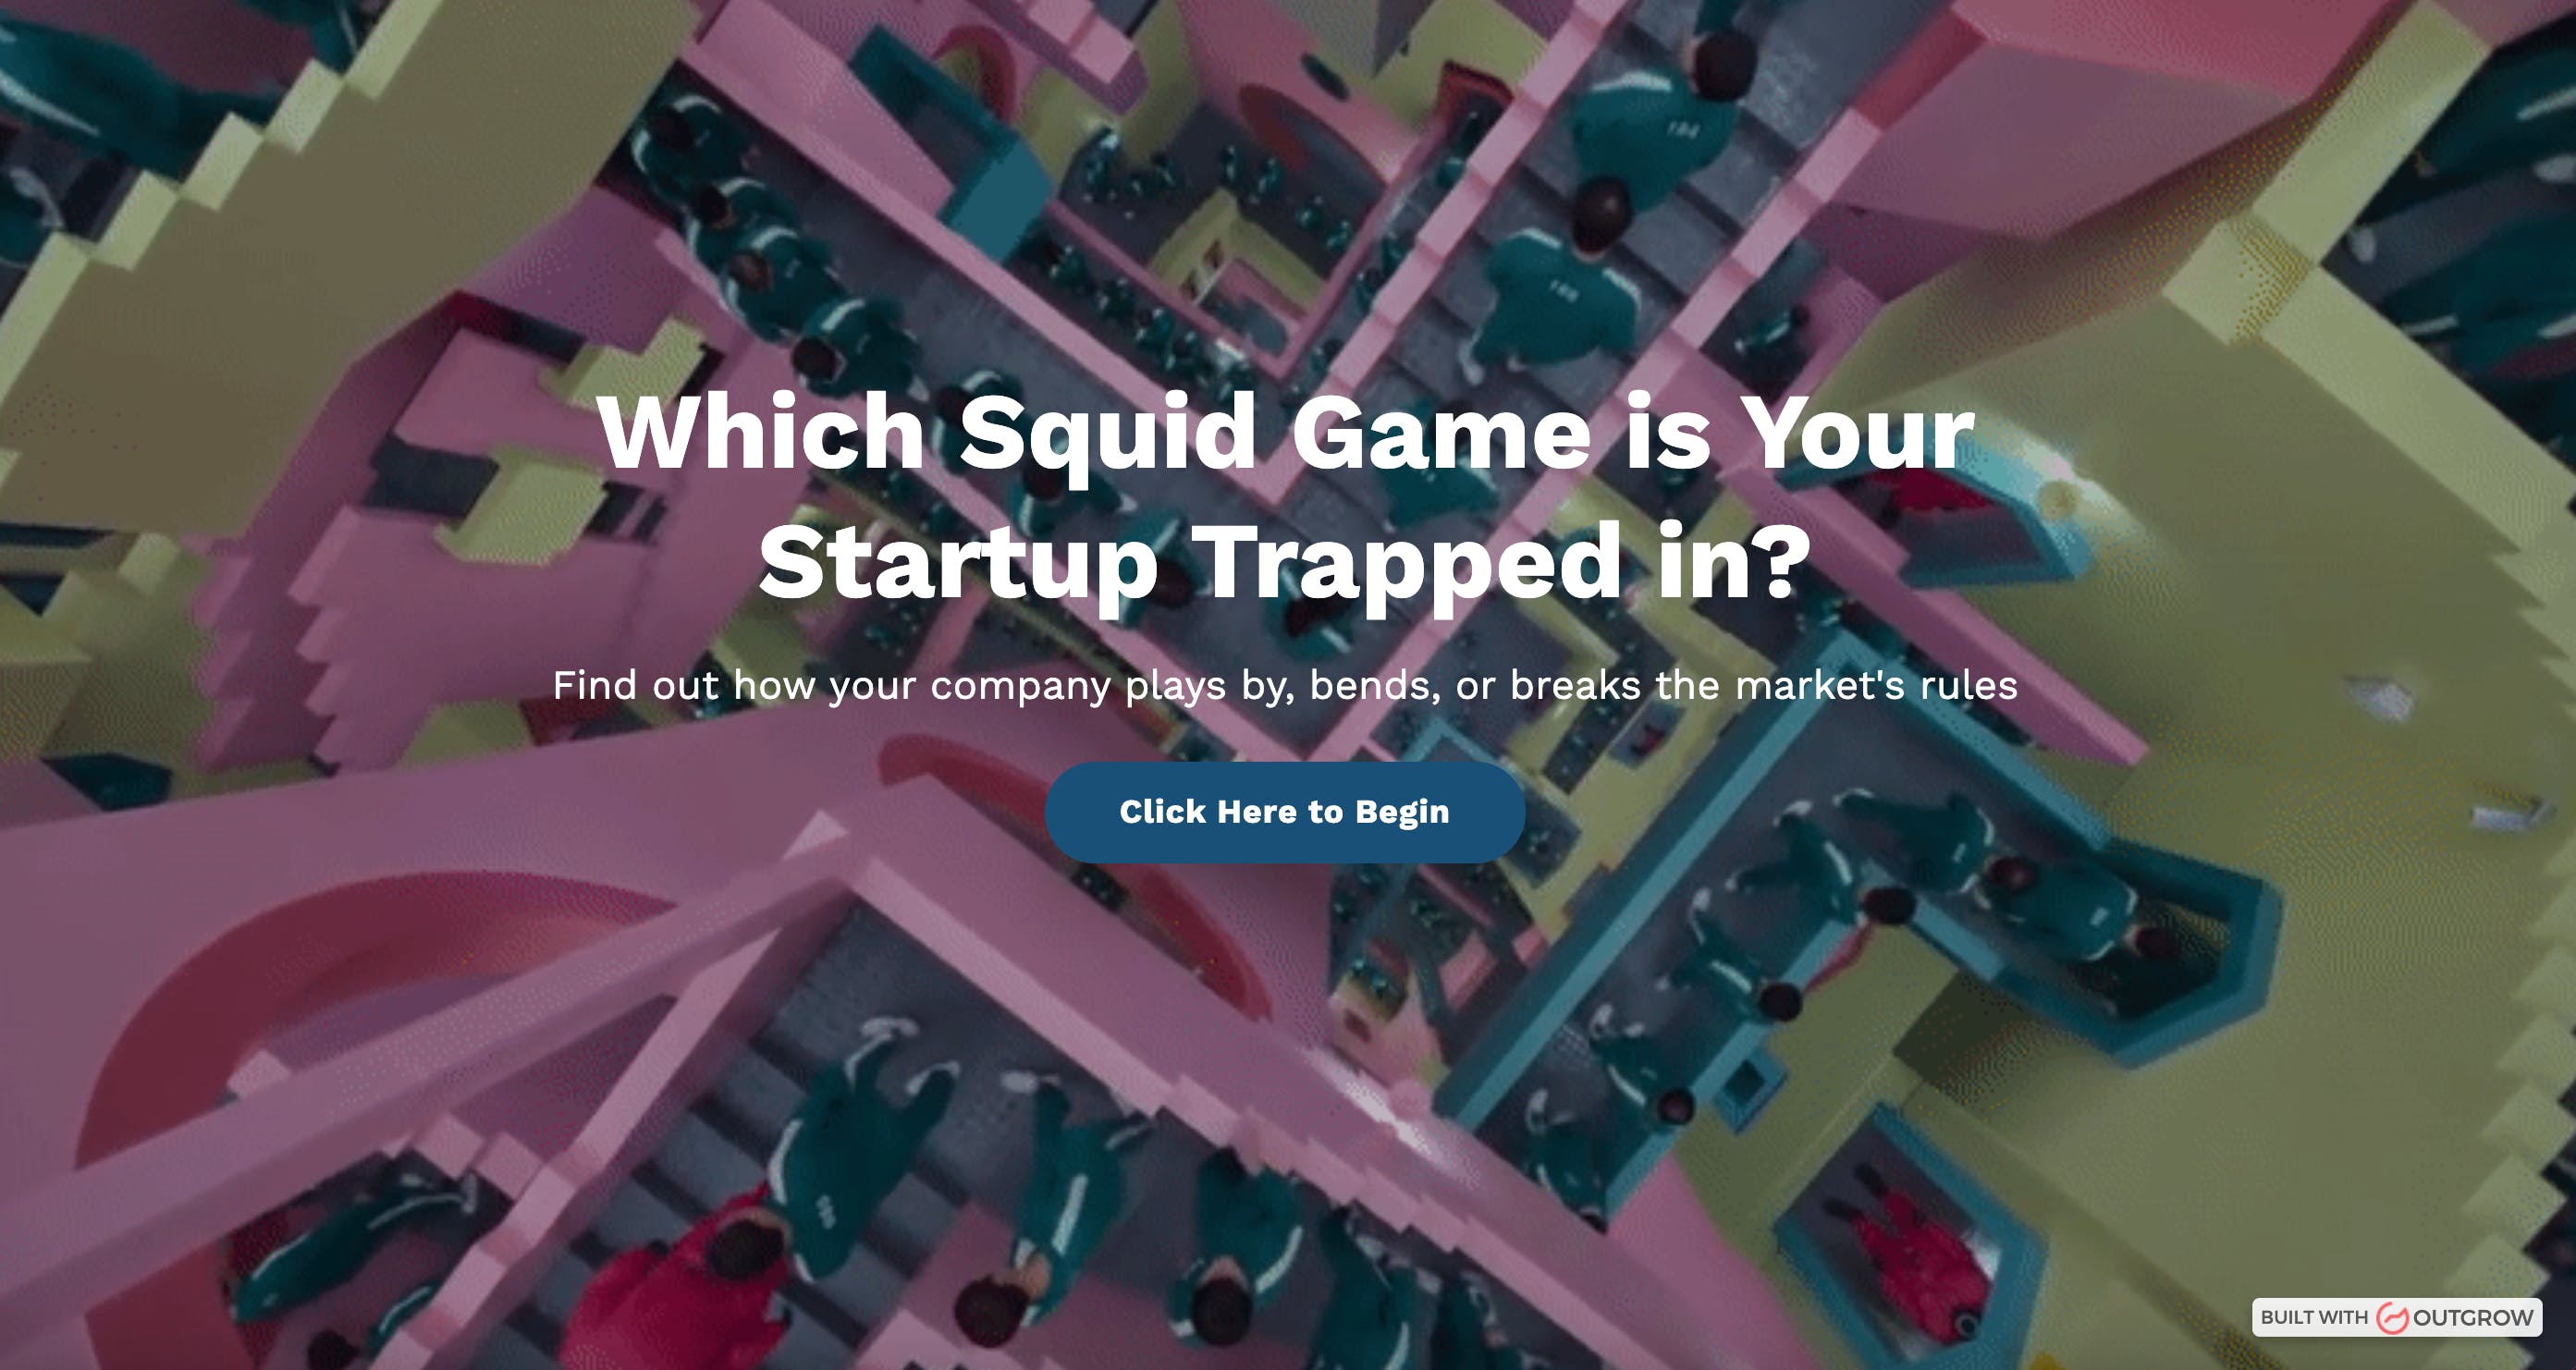 Is Your Startup Trapped in a Squid Game? media 1